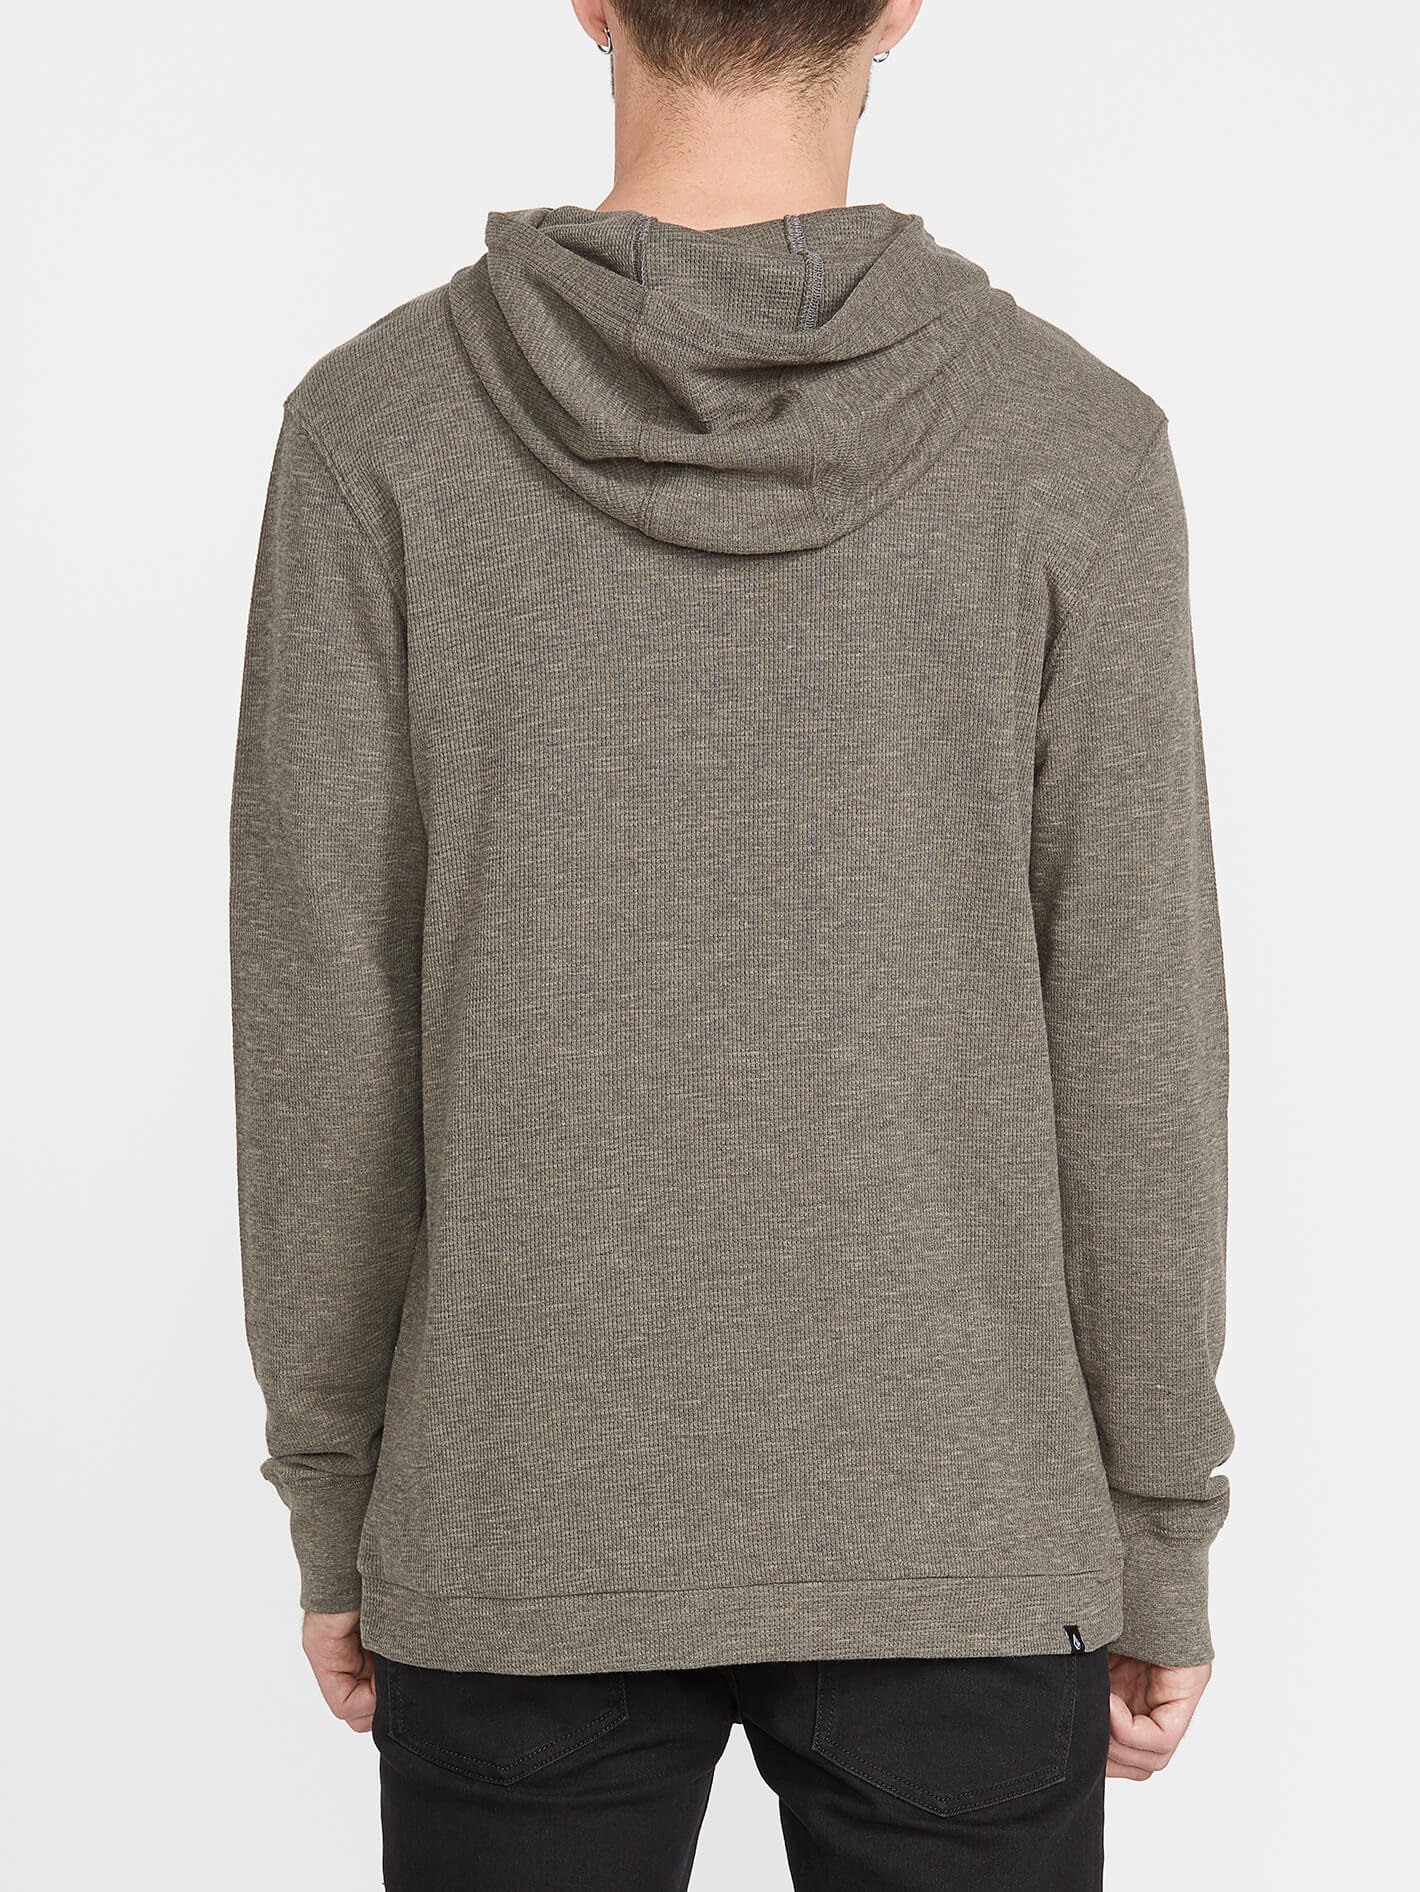 volcom Volcom Men's Wallace Hooded Thermal Gray Size Small